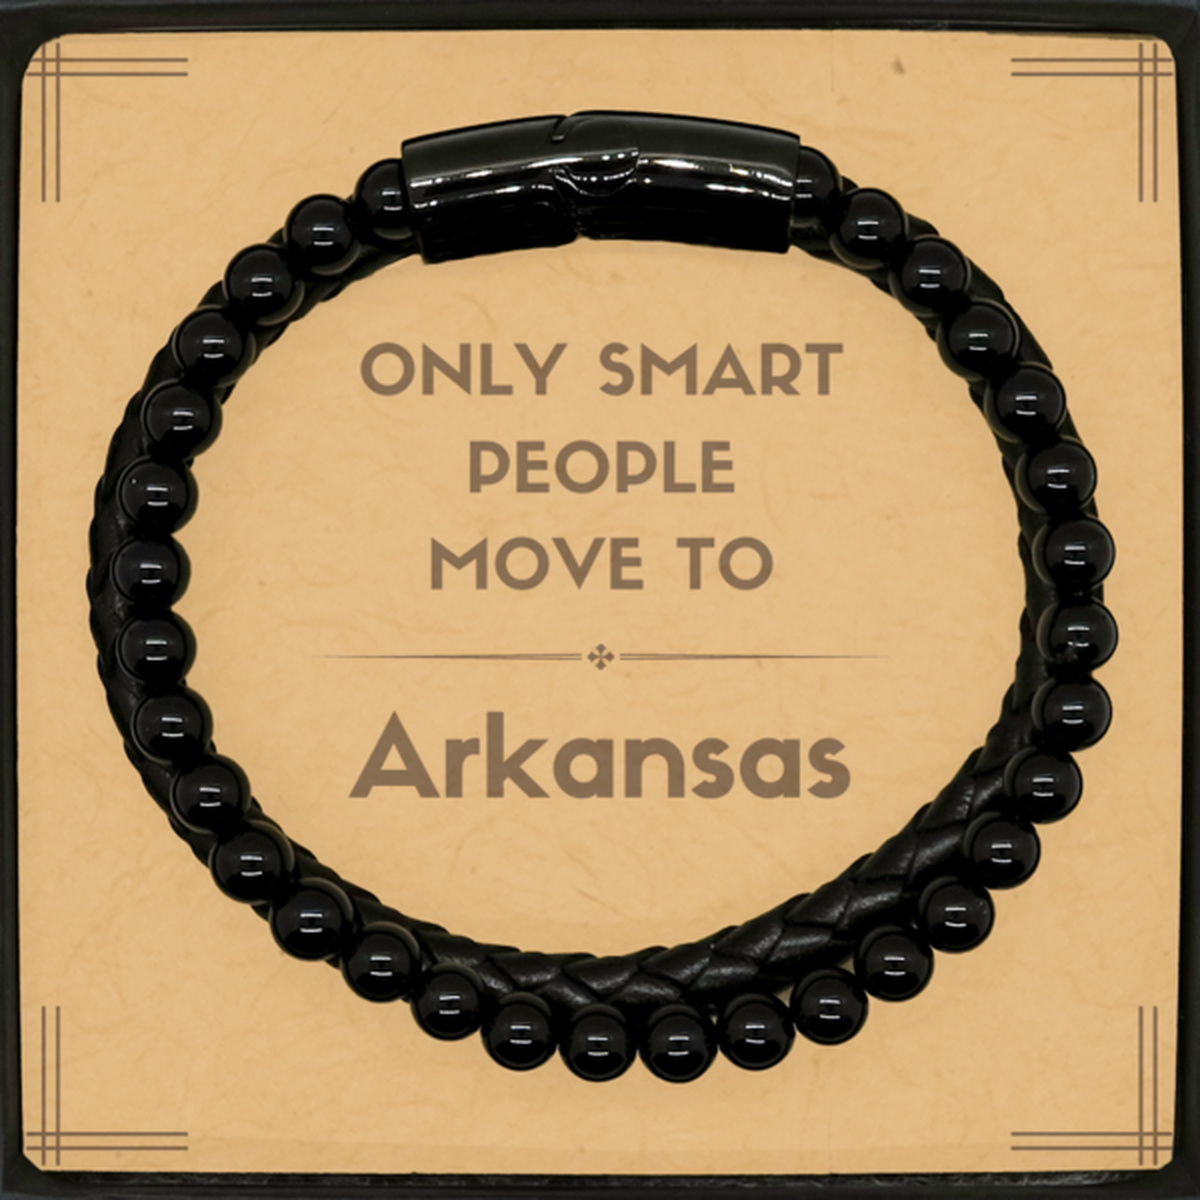 Only smart people move to Arkansas Stone Leather Bracelets, Message Card Gifts For Arkansas, Move to Arkansas Gifts for Friends Coworker Funny Saying Quote